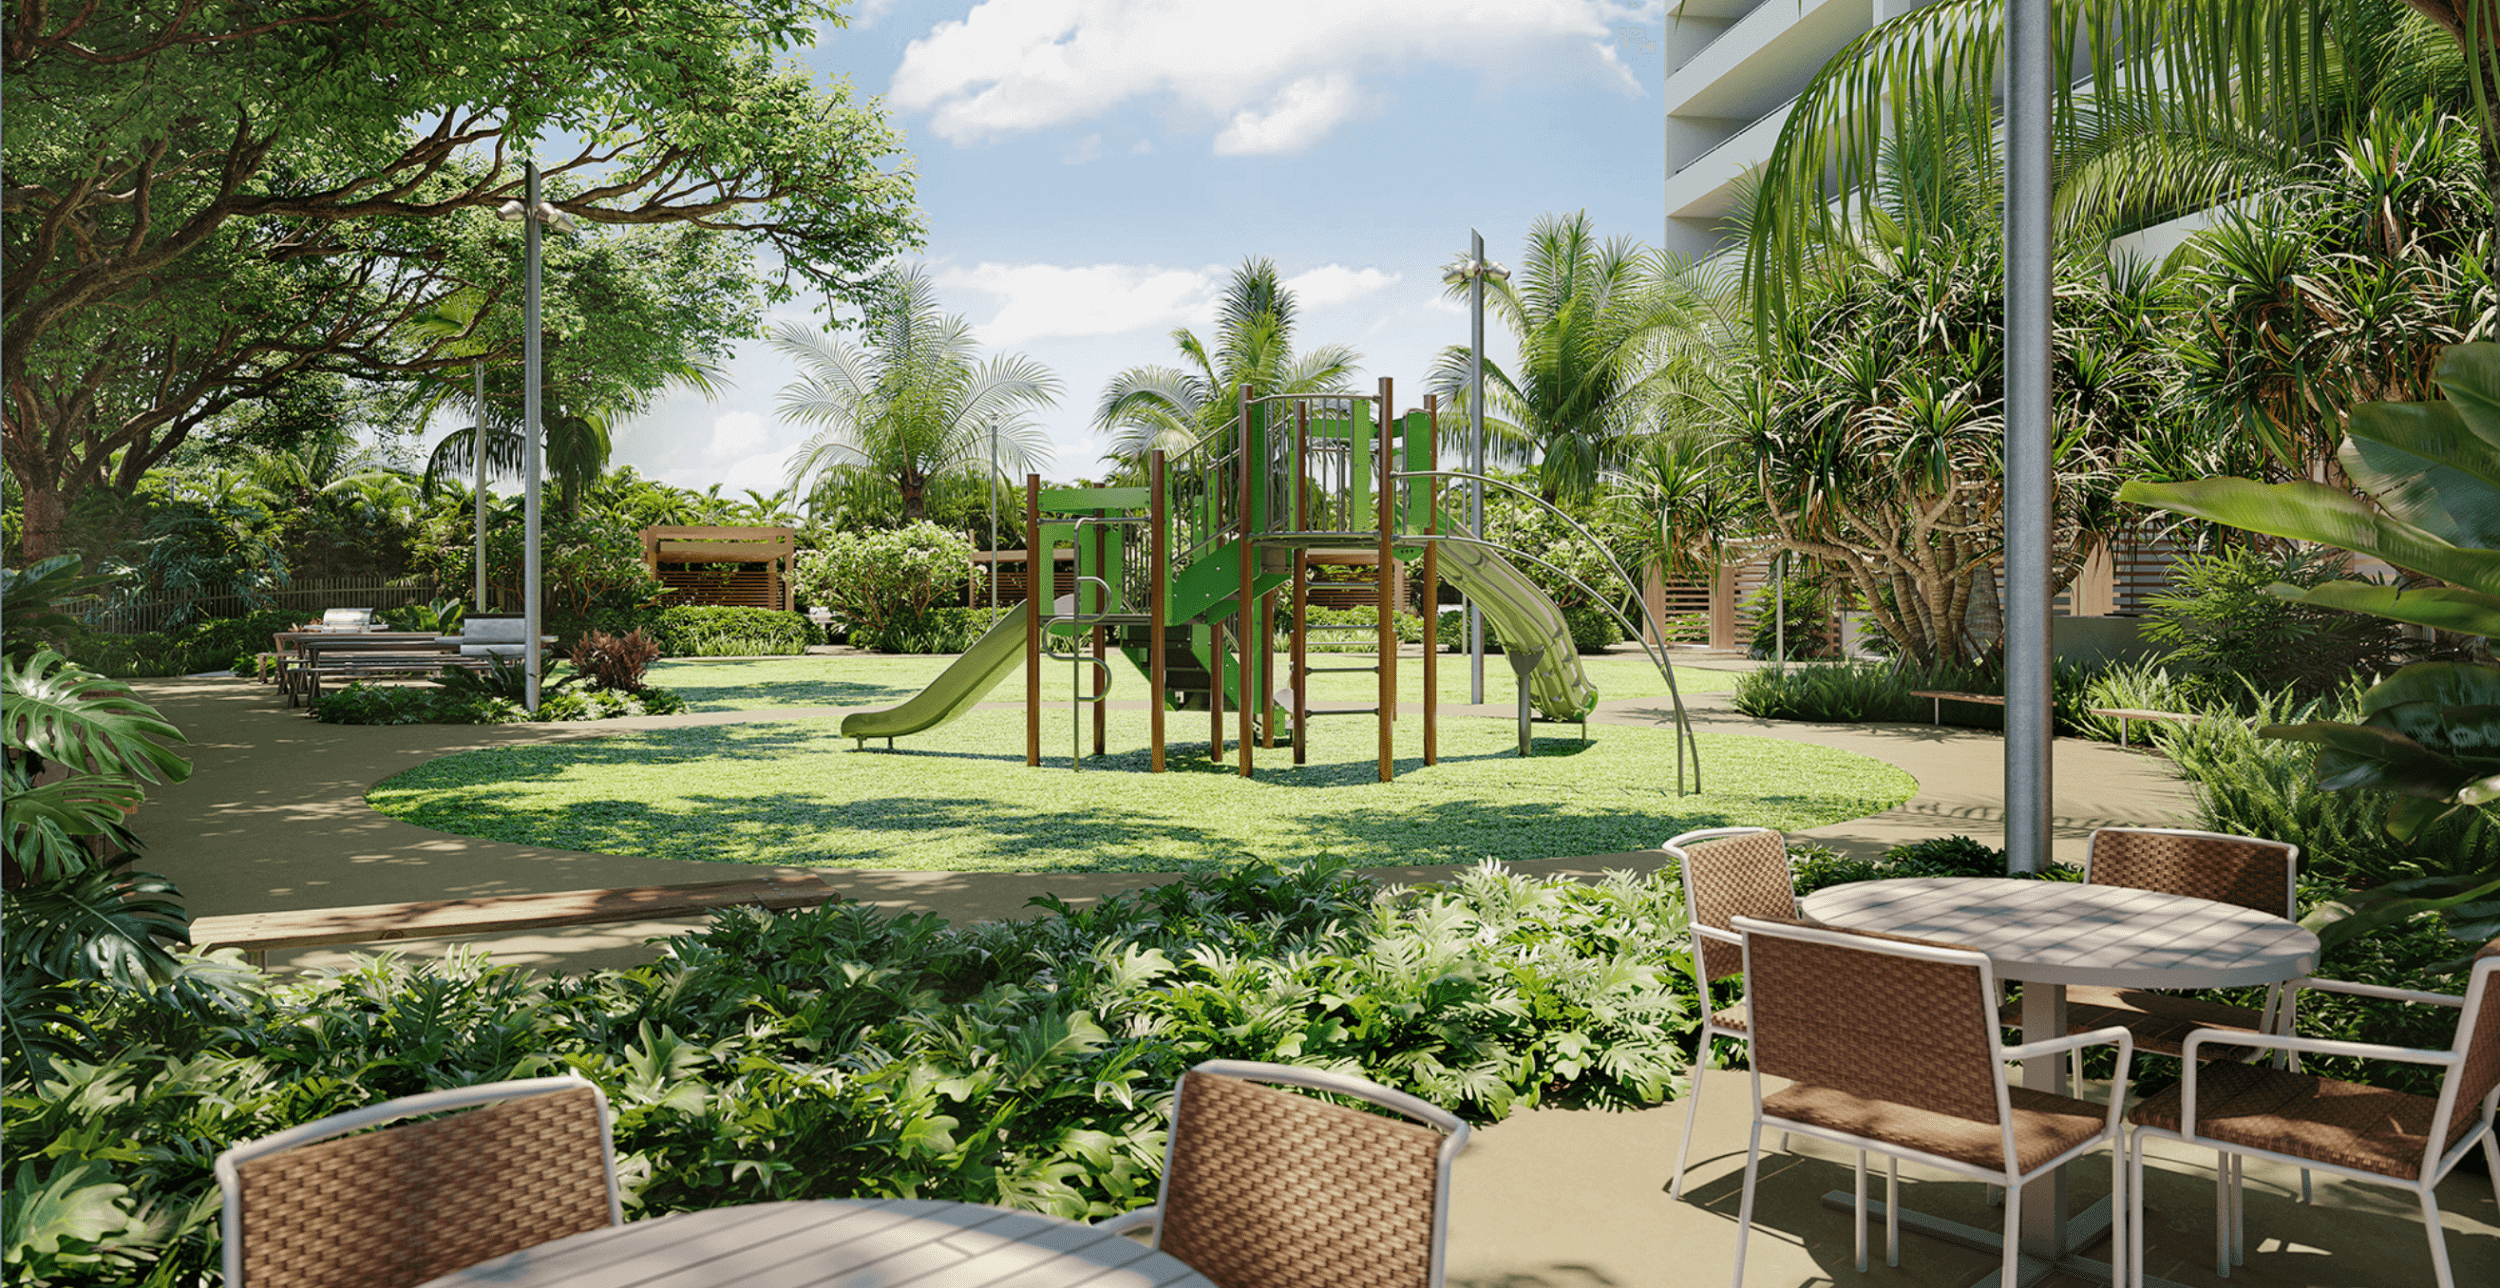 Render of lawn with playground